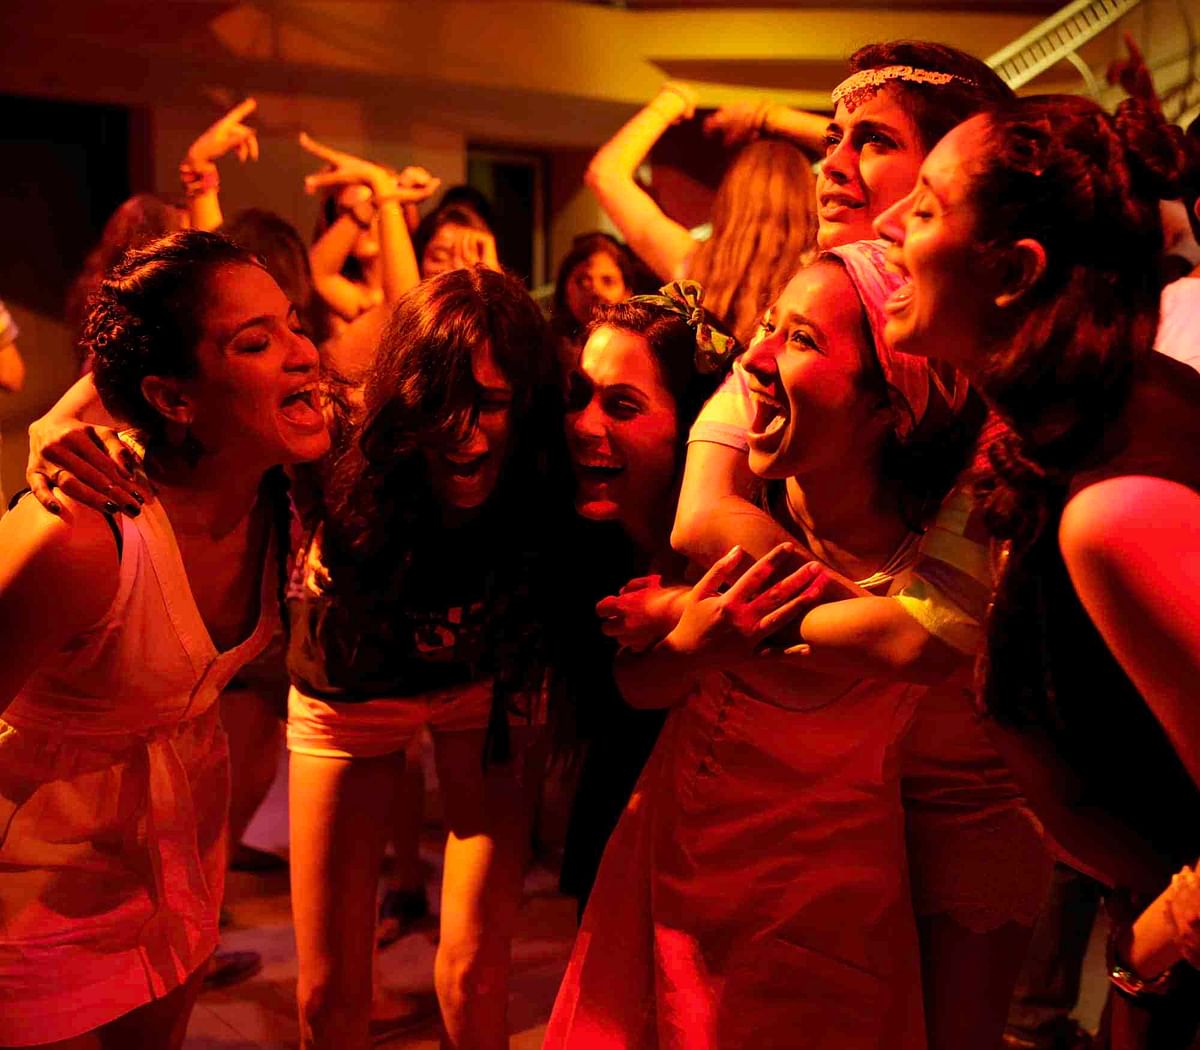 Pan Nalin’s ‘Angry Indian Goddesses’ emerges first runner-up at the Toronto International Film Festival awards